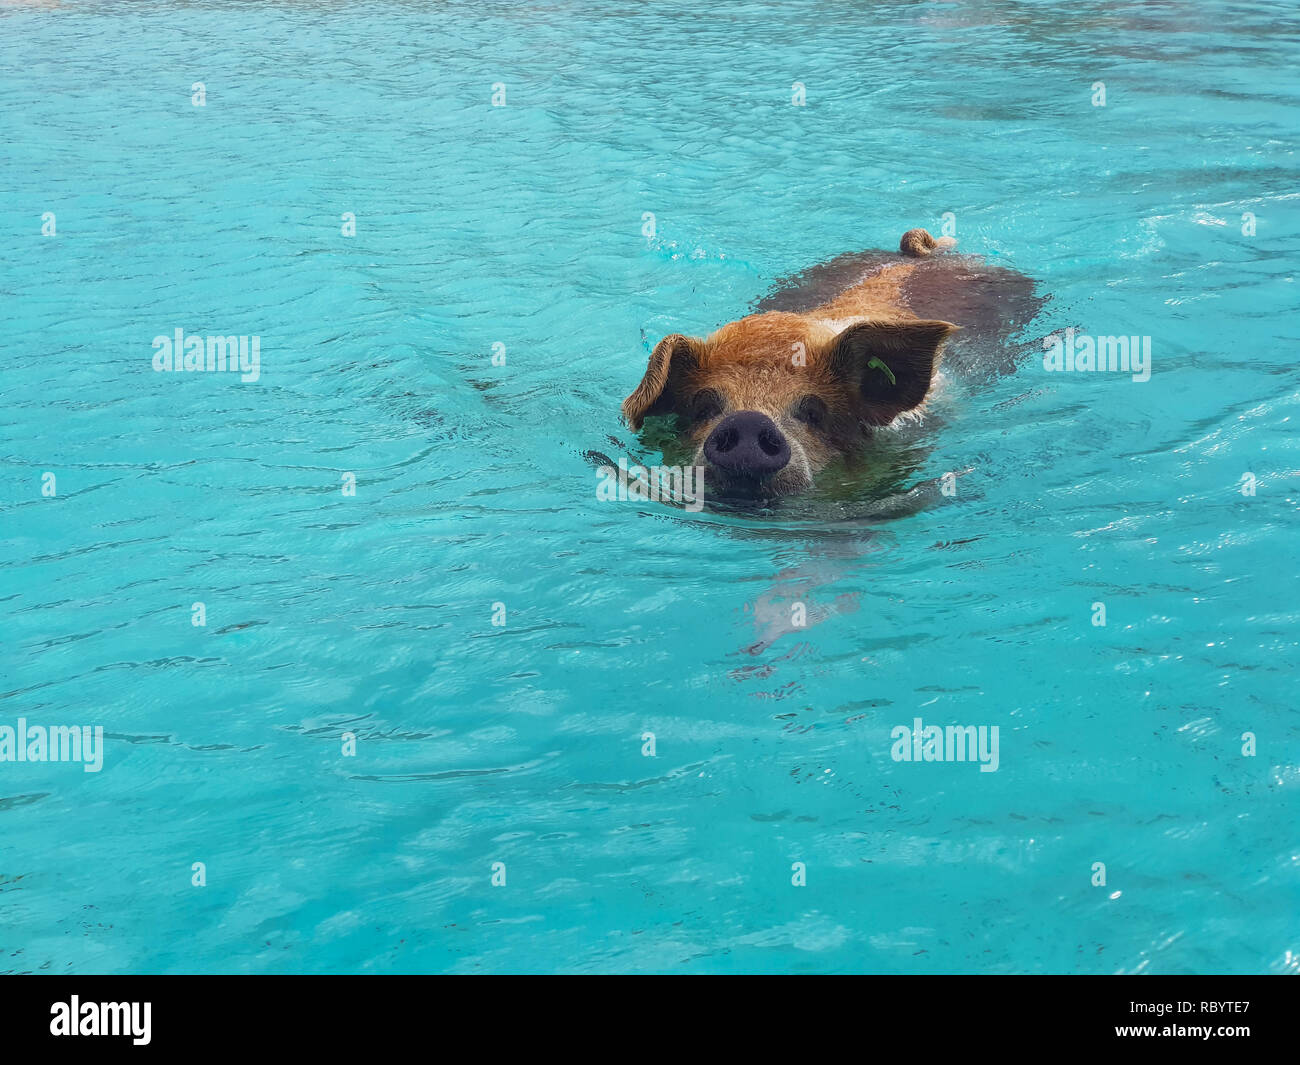 Pig Beach is an uninhabited island located in Exuma, the Bahamas. The island takes its unofficial name from the fact that it is populated pigs. Stock Photo